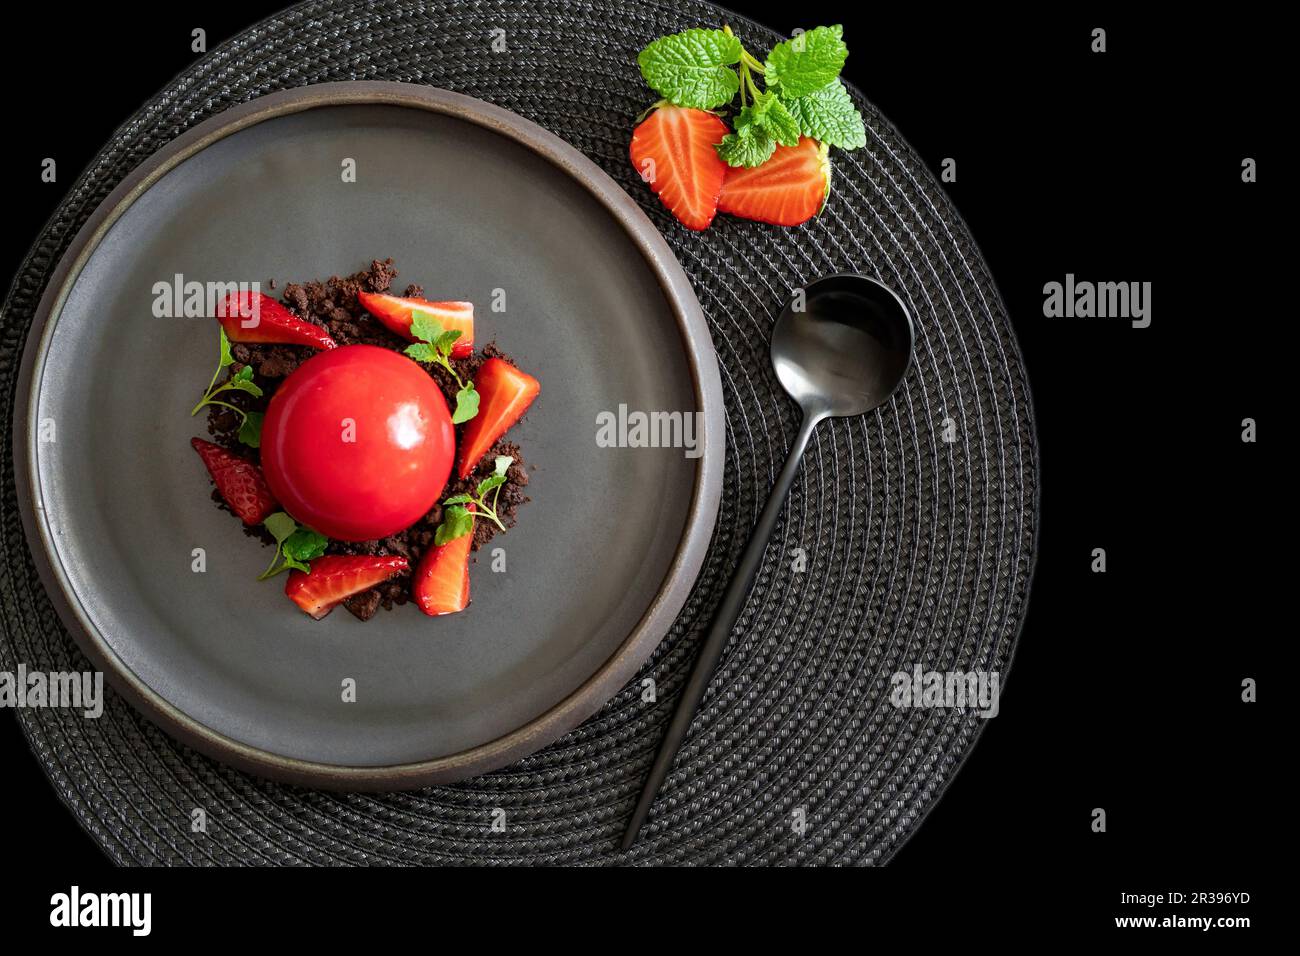 Top view of a sphere curd cake with strawberries and brownies. Dessert with smooth surfaces and mirror glaze on the black plate. Black background. Stock Photo